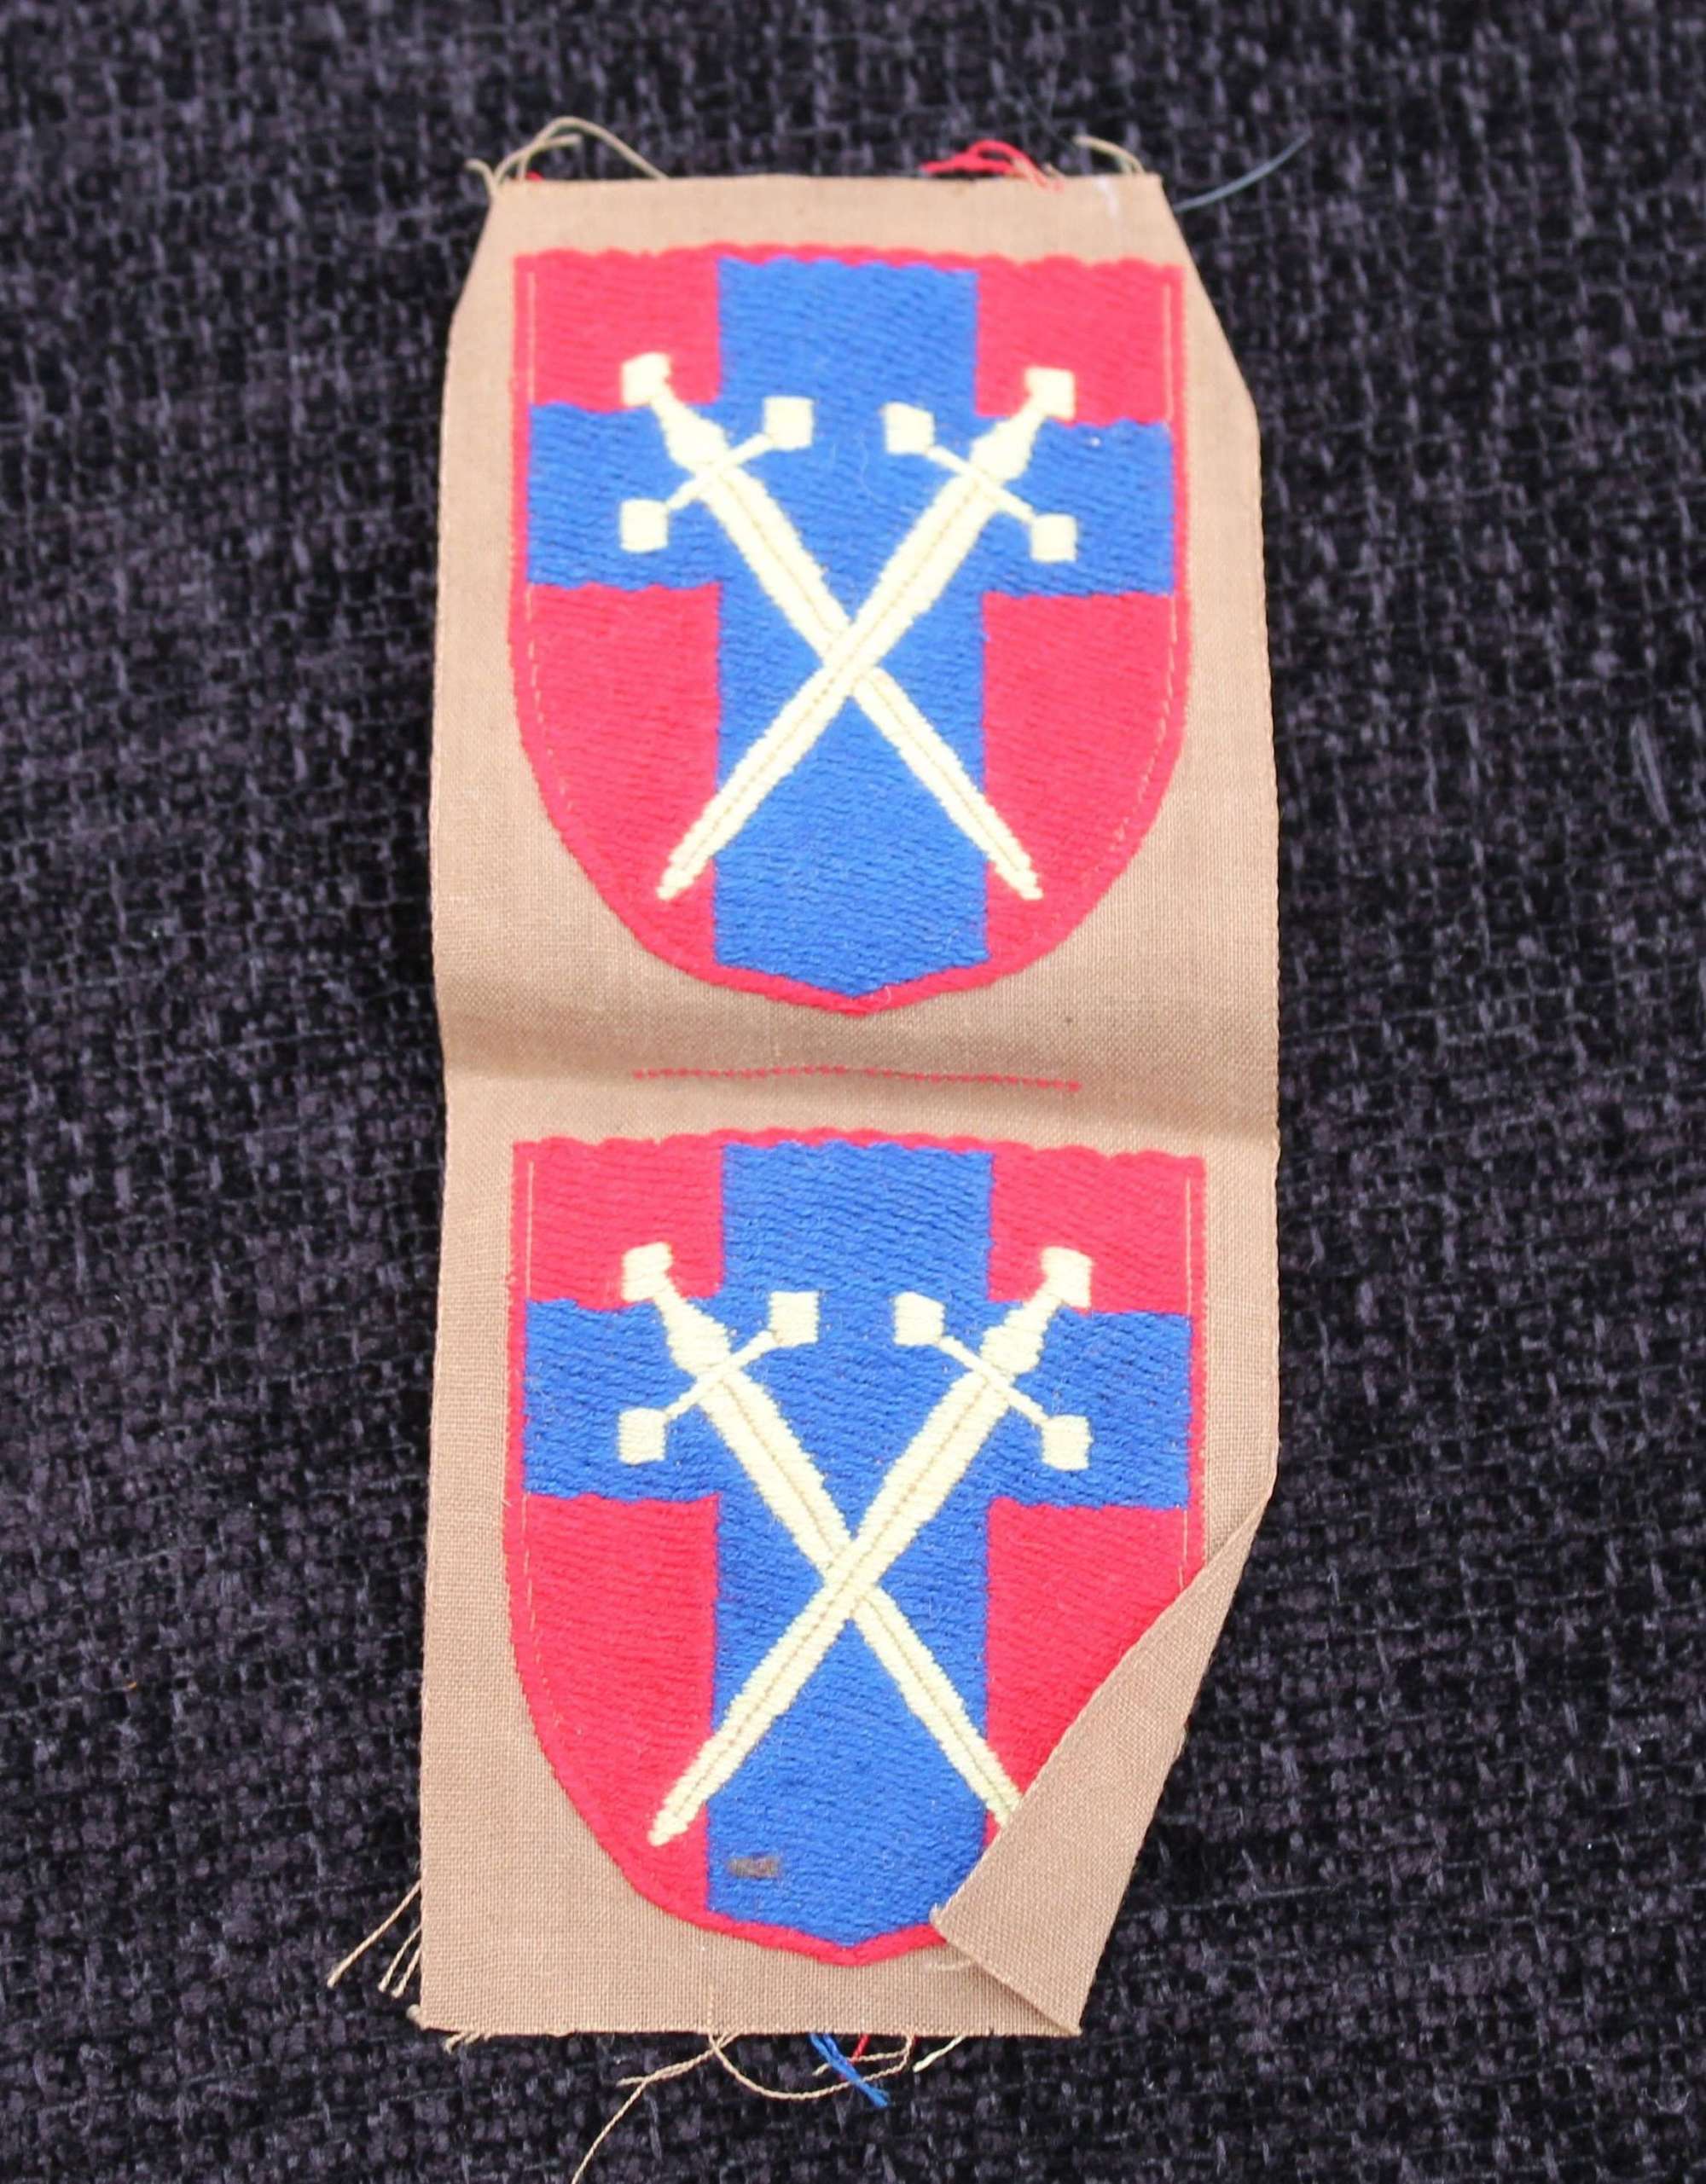 21st Army Group HQ Headquarters Cloth Formation Signs/Patches/Badges